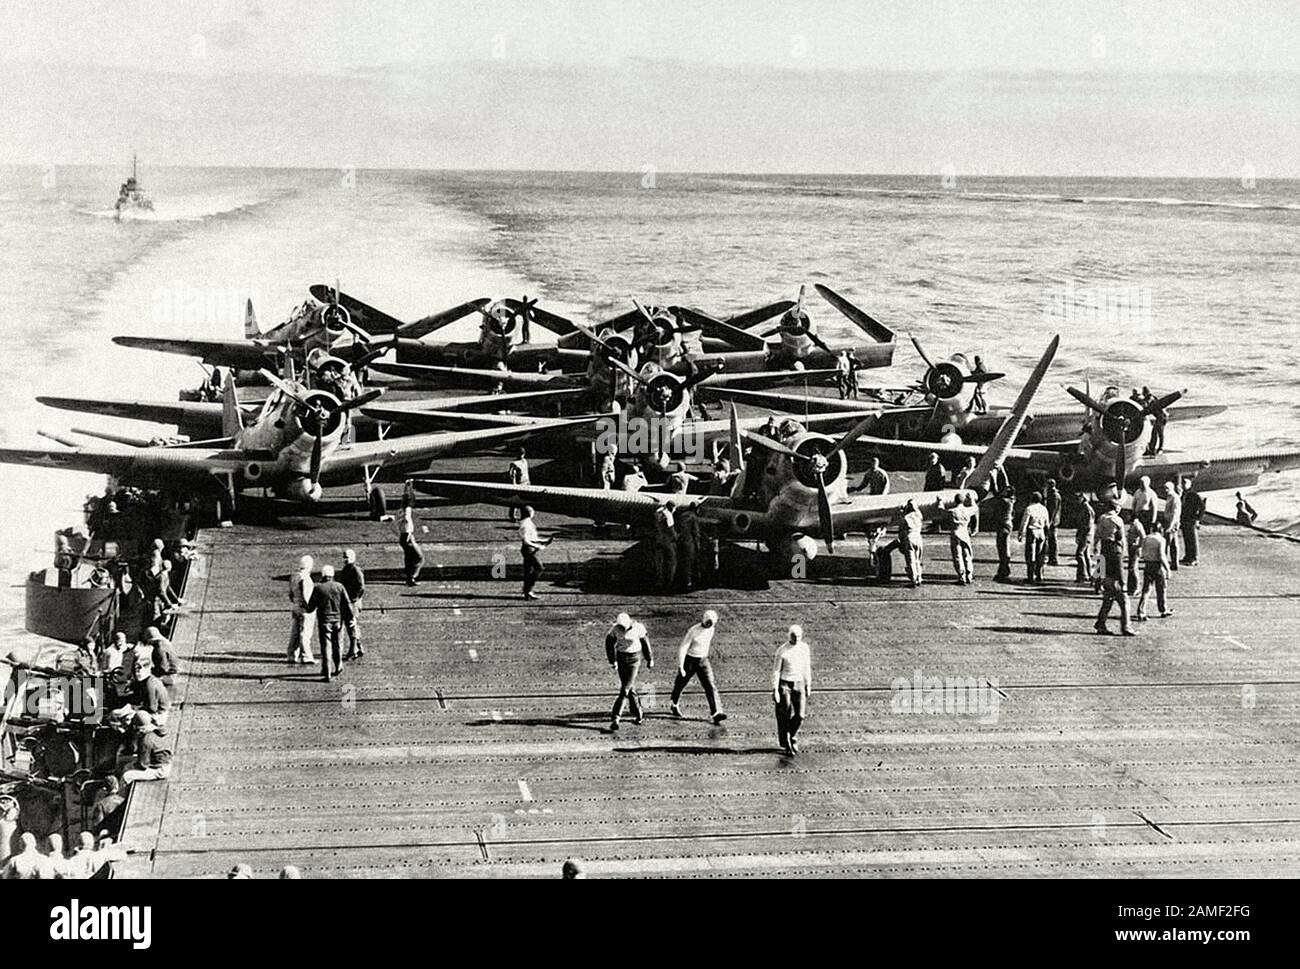 TBD-1 torpedo bombers of Torpedo Squadron Six unfold their wings on the deck of USS Enterprise prior to launching an attack against four Japanese carr Stock Photo